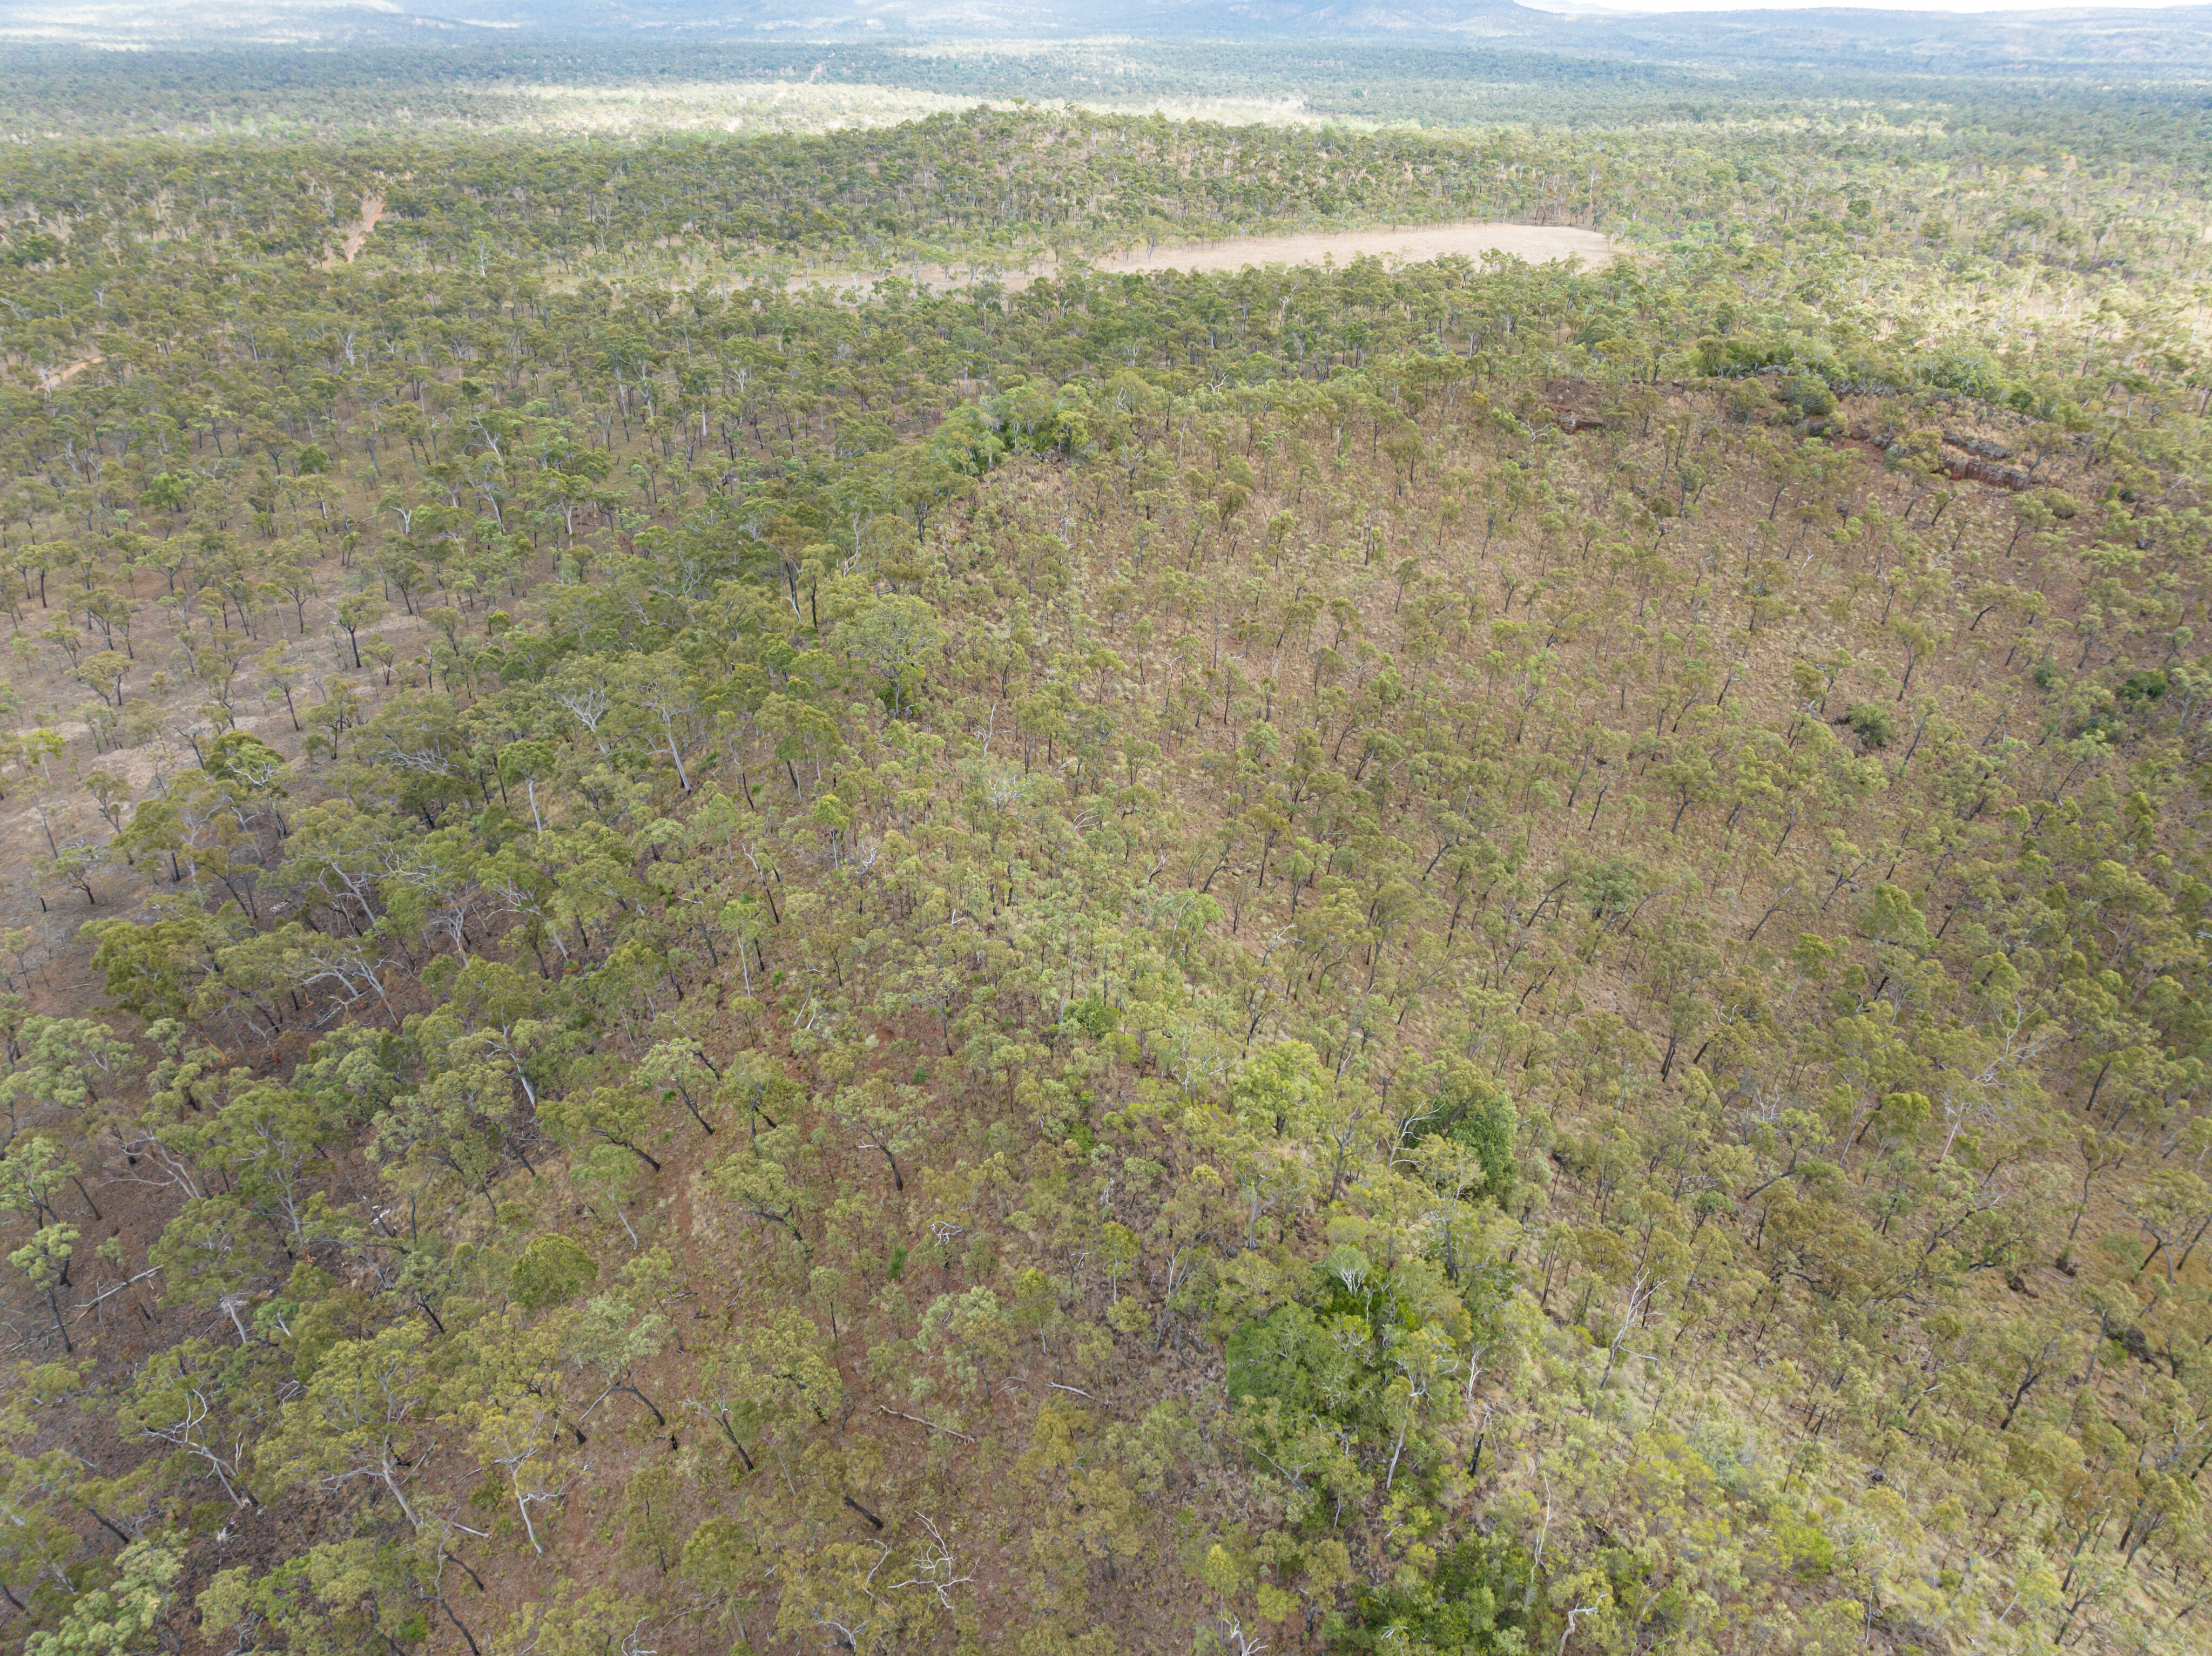 7d0234b0/4x4 australia explore blackbraes queensland it takes a drone to be able to appreciate the size of this volcanic crater jpg